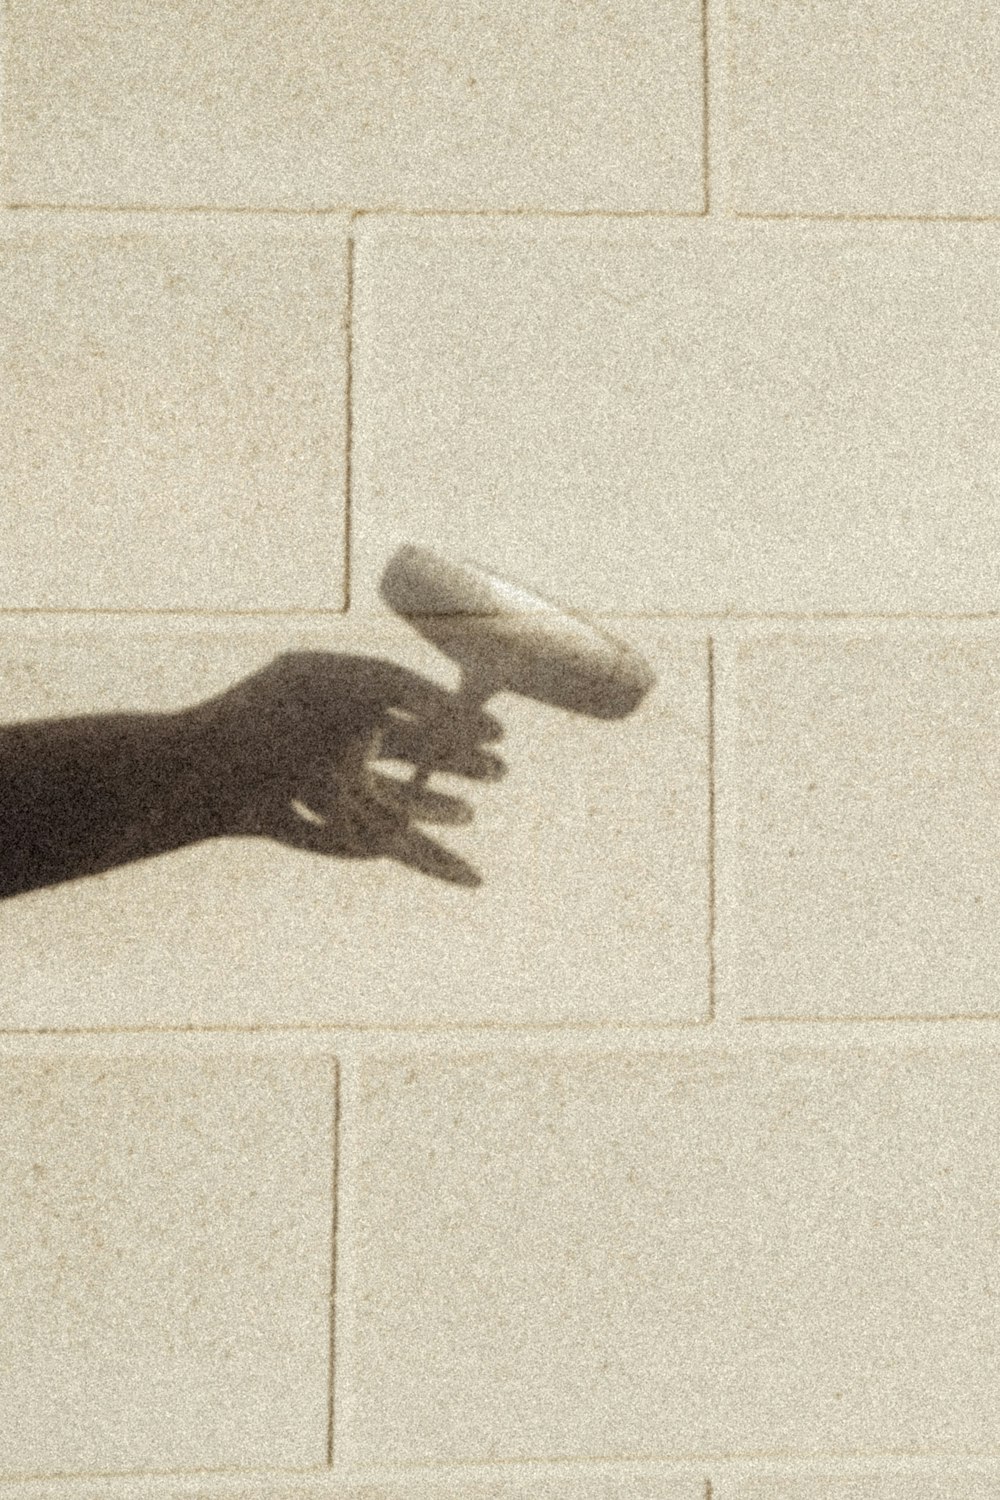 a hand reaching for a frisbee on a brick wall